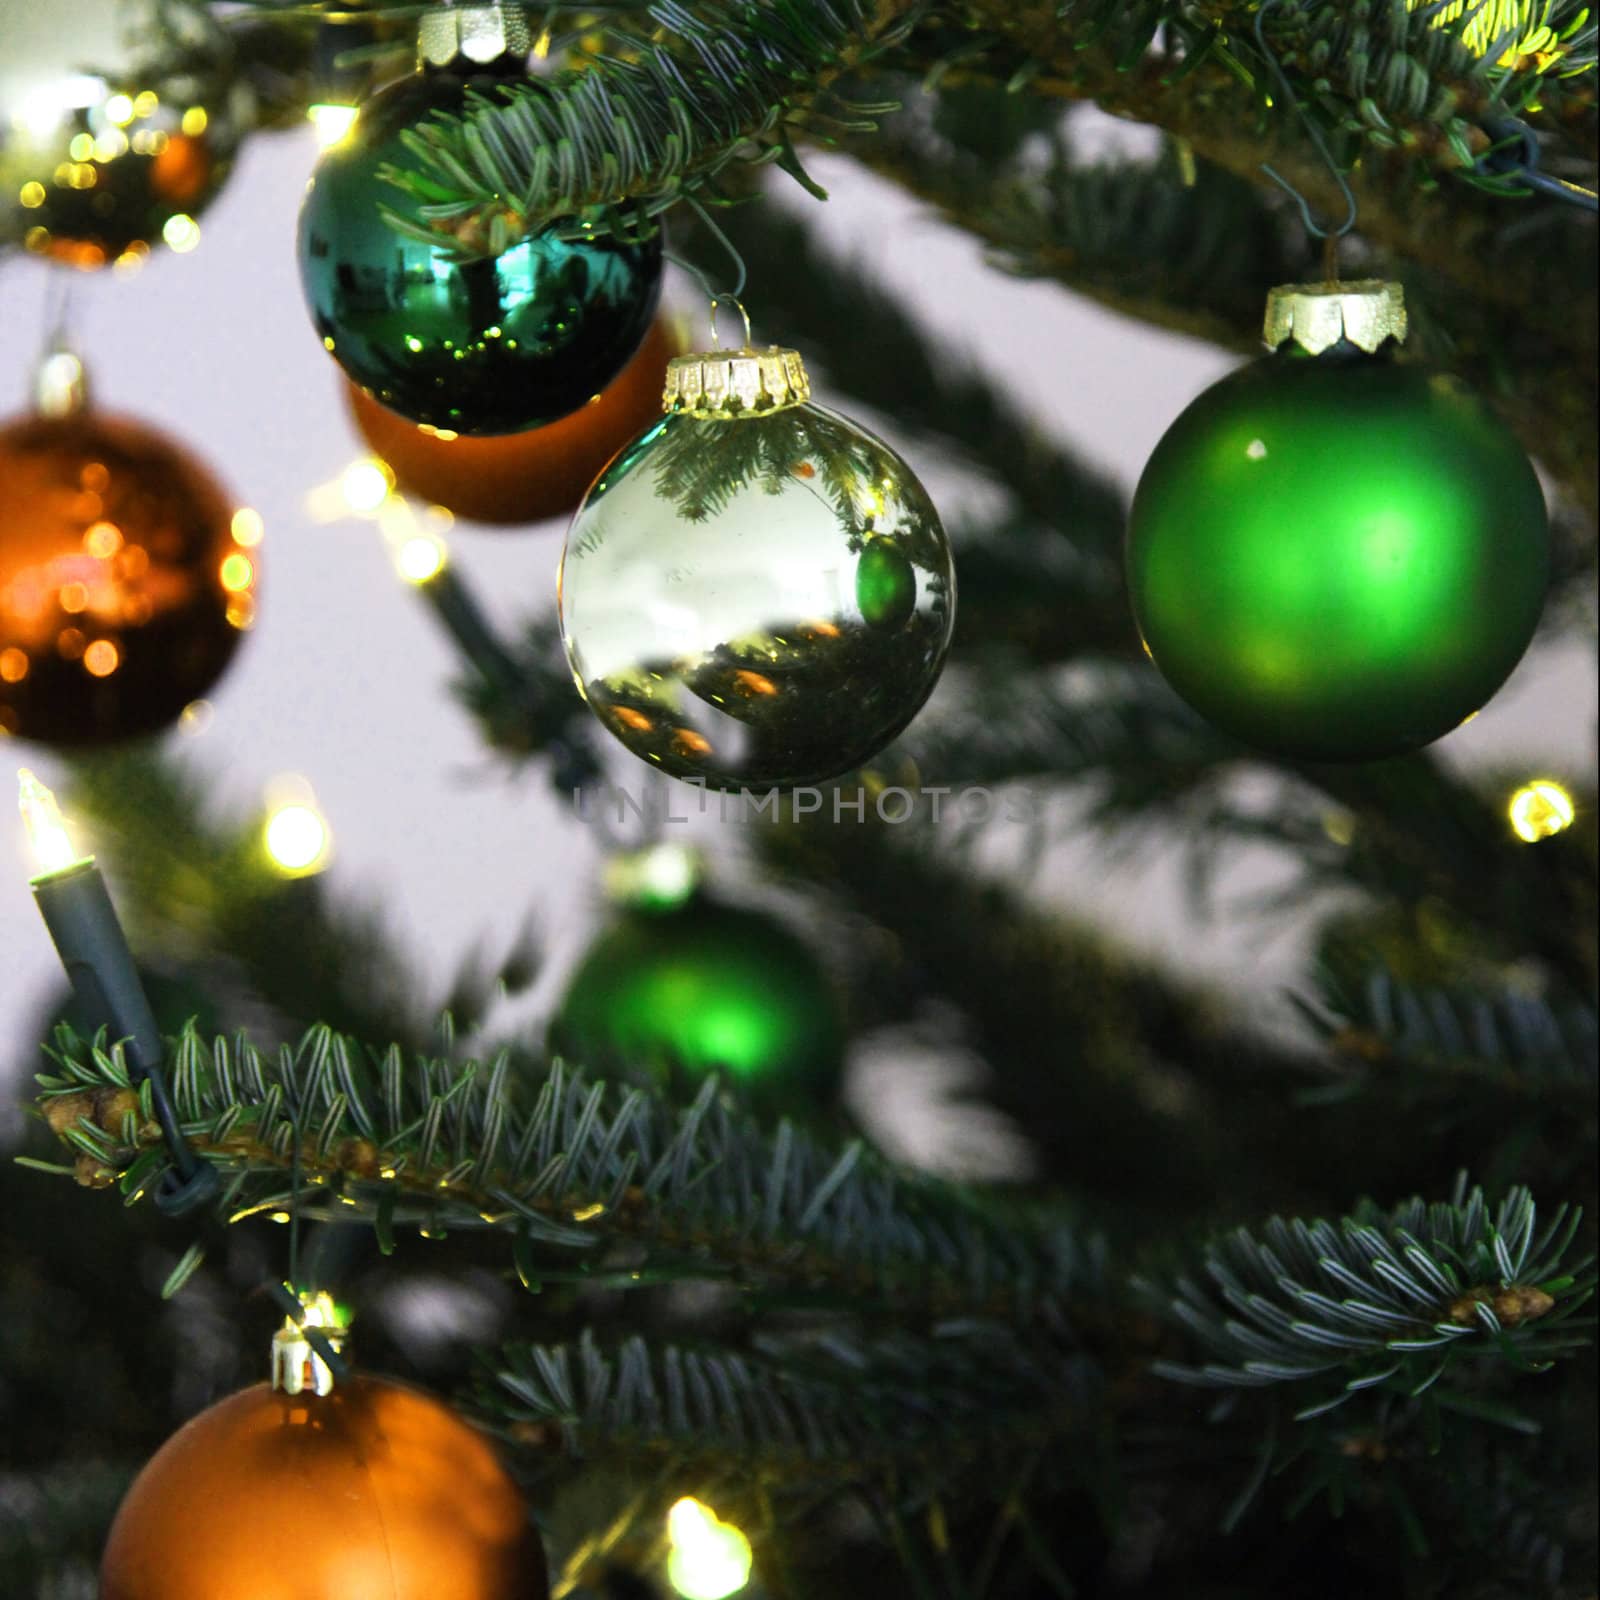 Christmas tree with shiny decorative green globes, close up